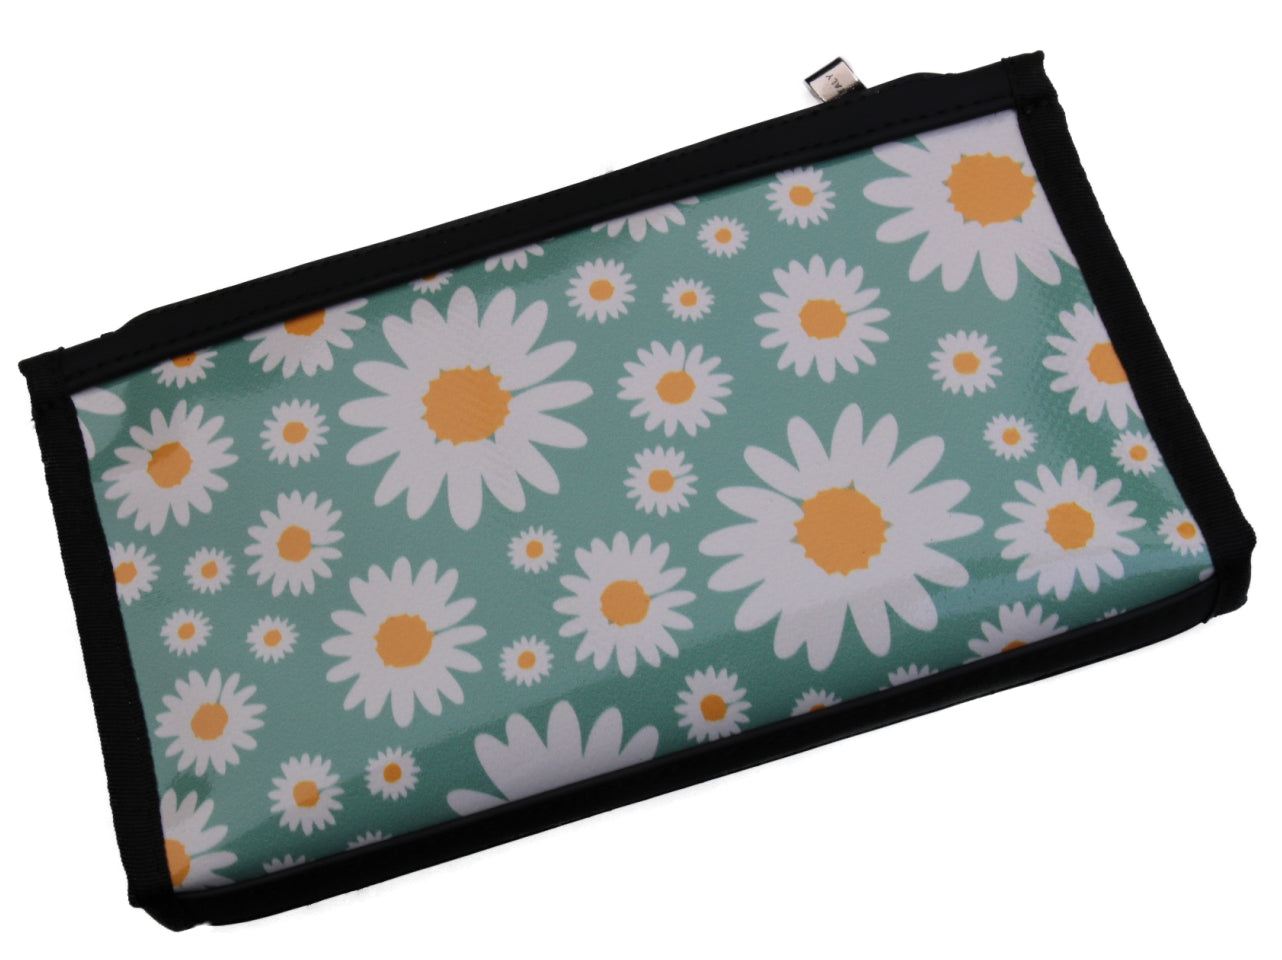 LIGHT GREEN LARGE WOMEN'S WALLET WITH FLORAL FANTASY. MODEL PIT MADE OF LORRY TARPAULIN. - Limited Edition Paul Meccanico